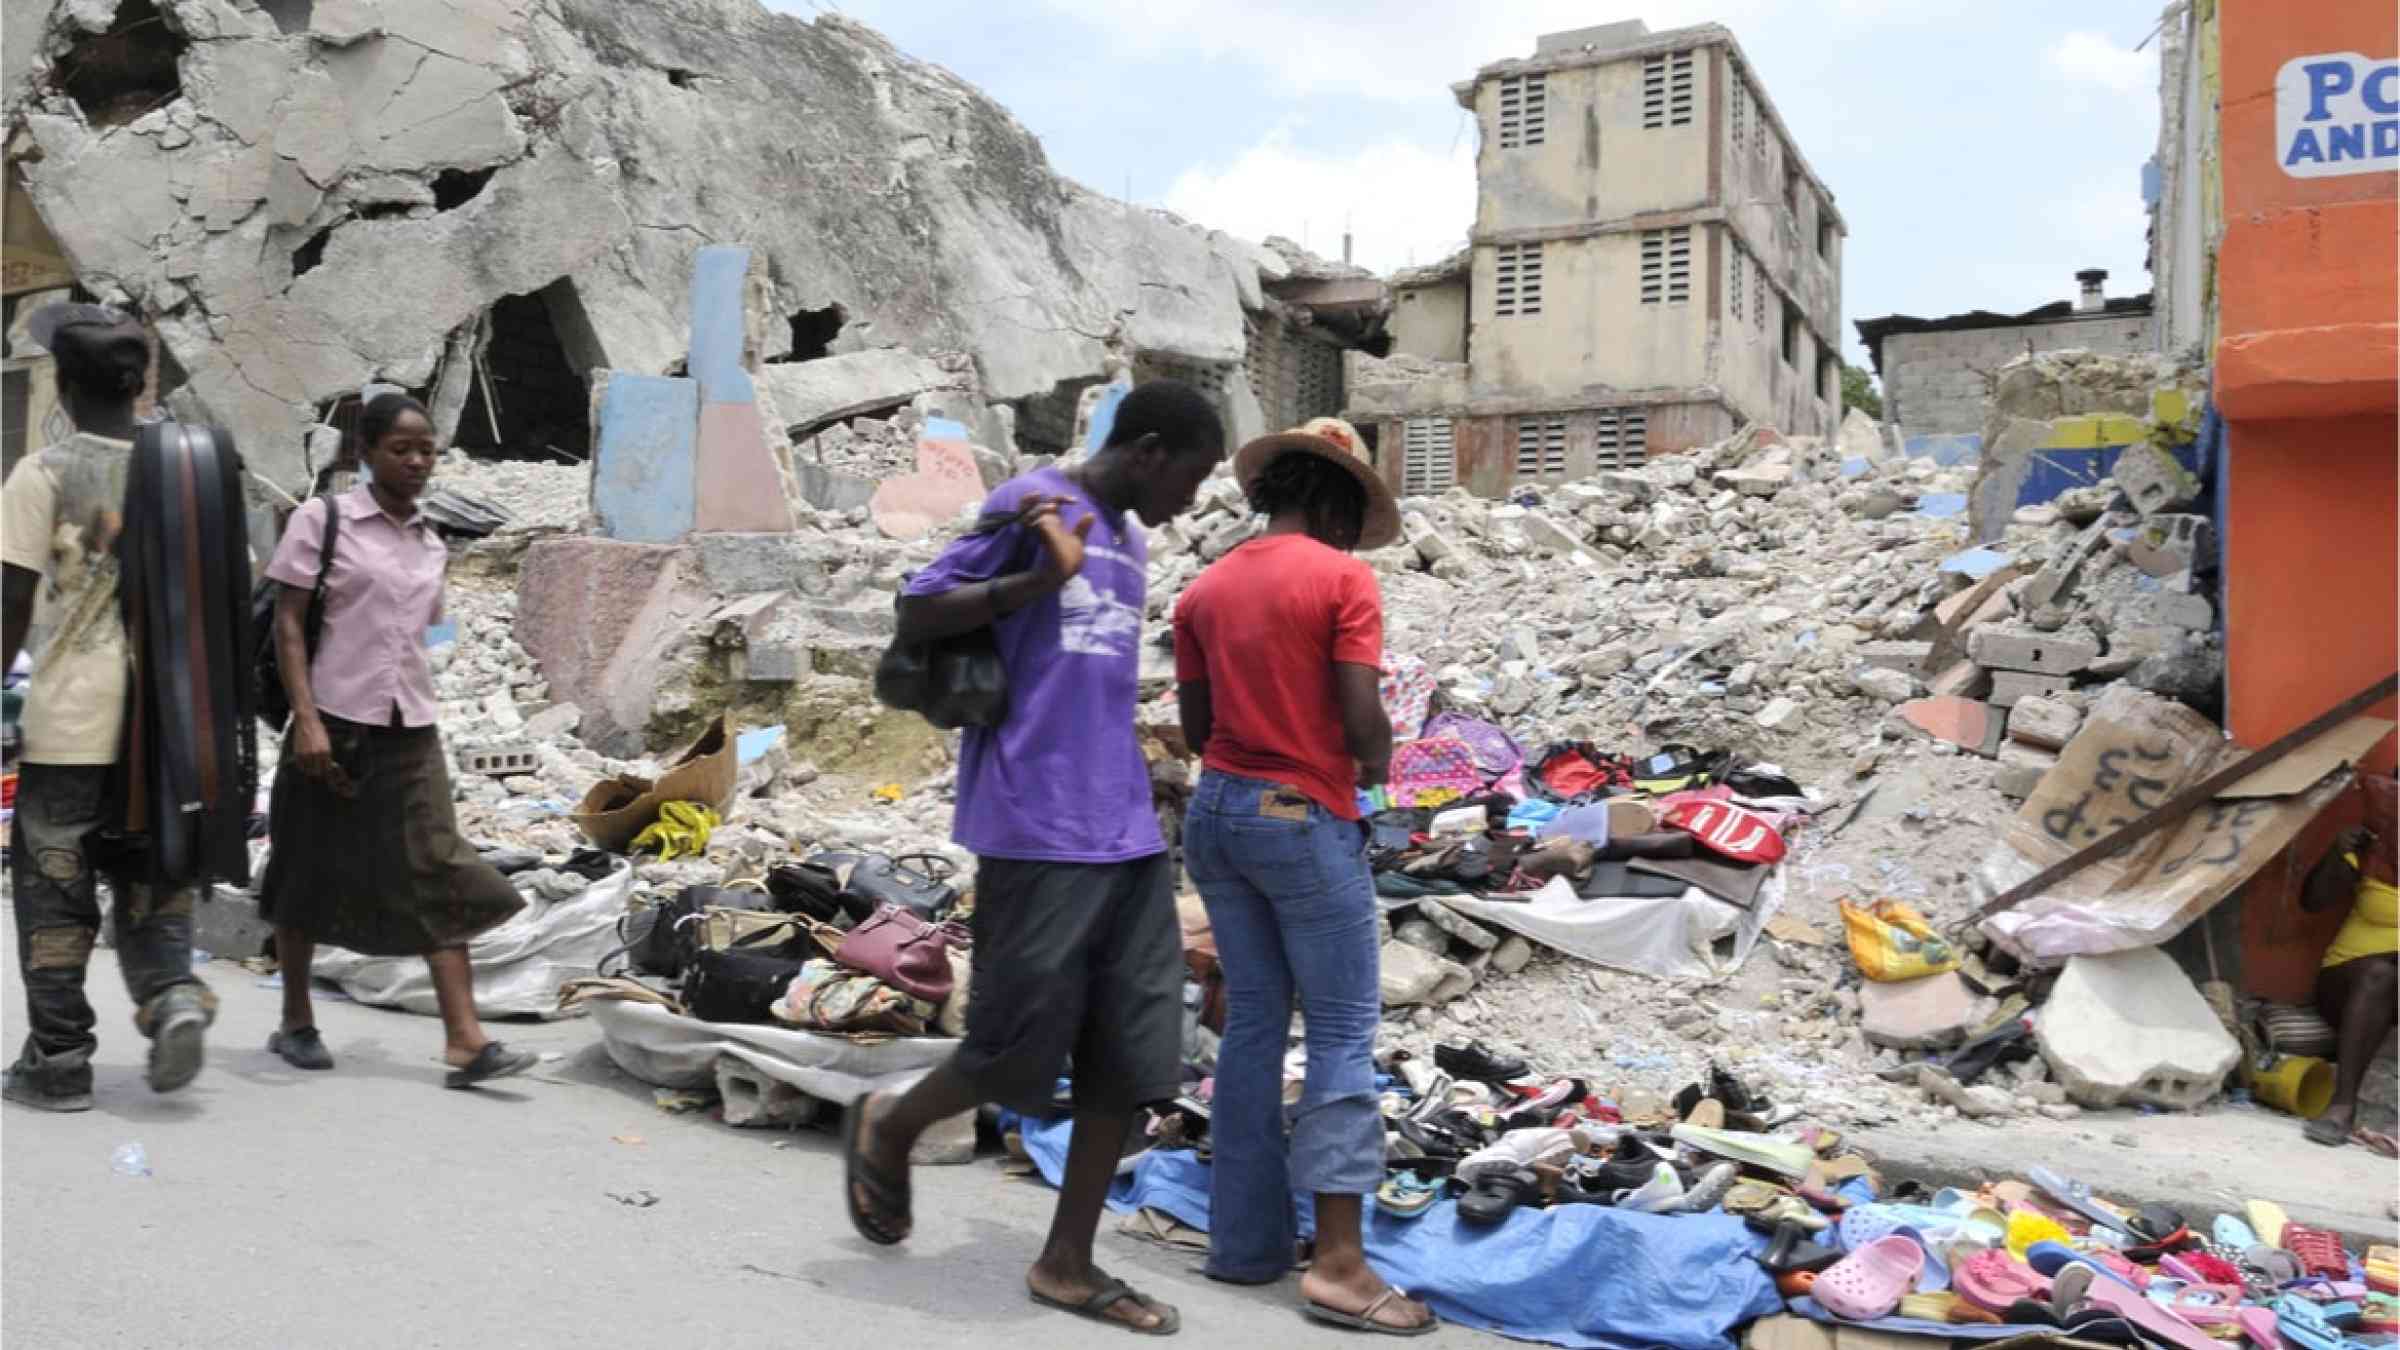 Two people standing in front of a collapsed building after the Haiti earthquake in 2010.